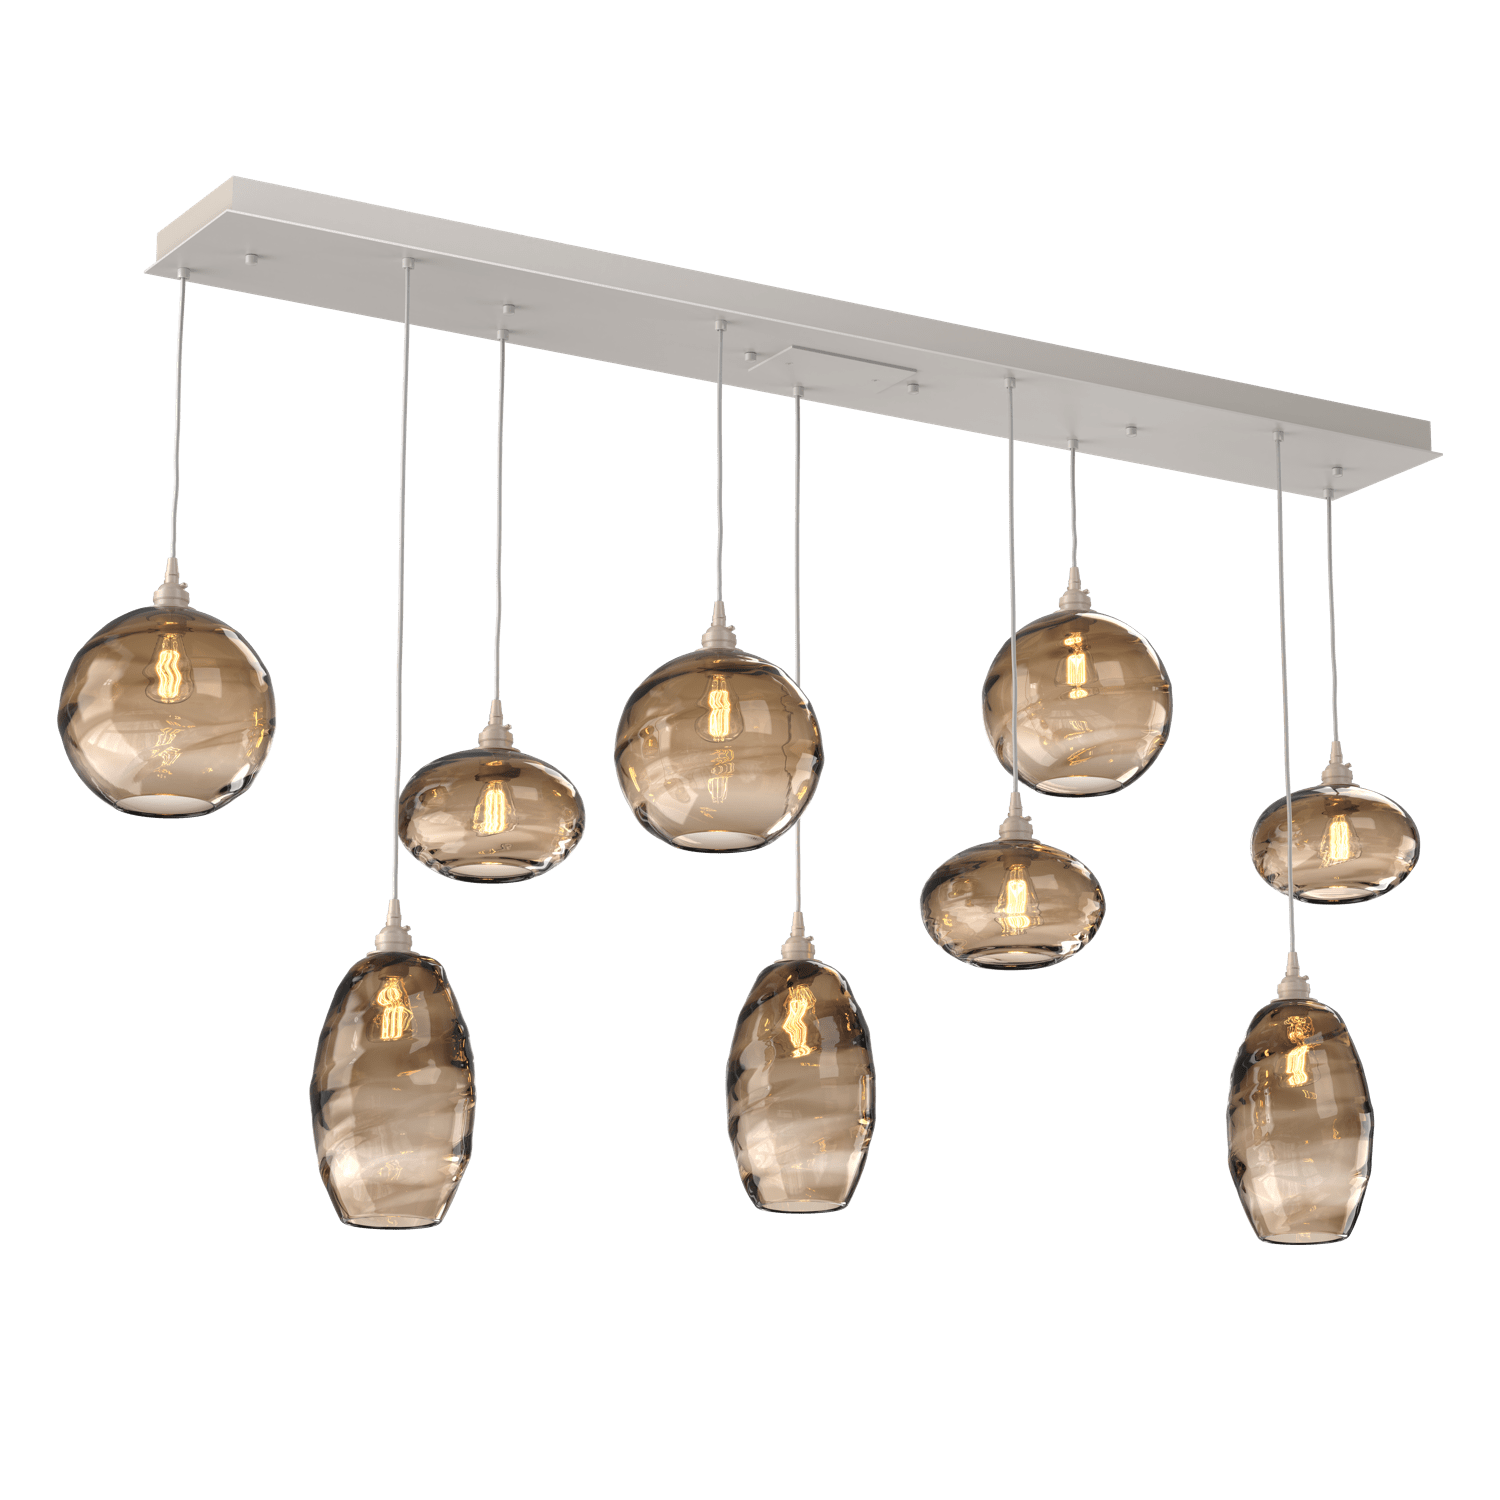 PLB0048-09-BS-OB-Hammerton-Studio-Optic-Blown-Glass-Misto-9-light-linear-pendant-chandelier-with-metallic-beige-silver-finish-and-optic-bronze-blown-glass-shades-and-incandescent-lamping